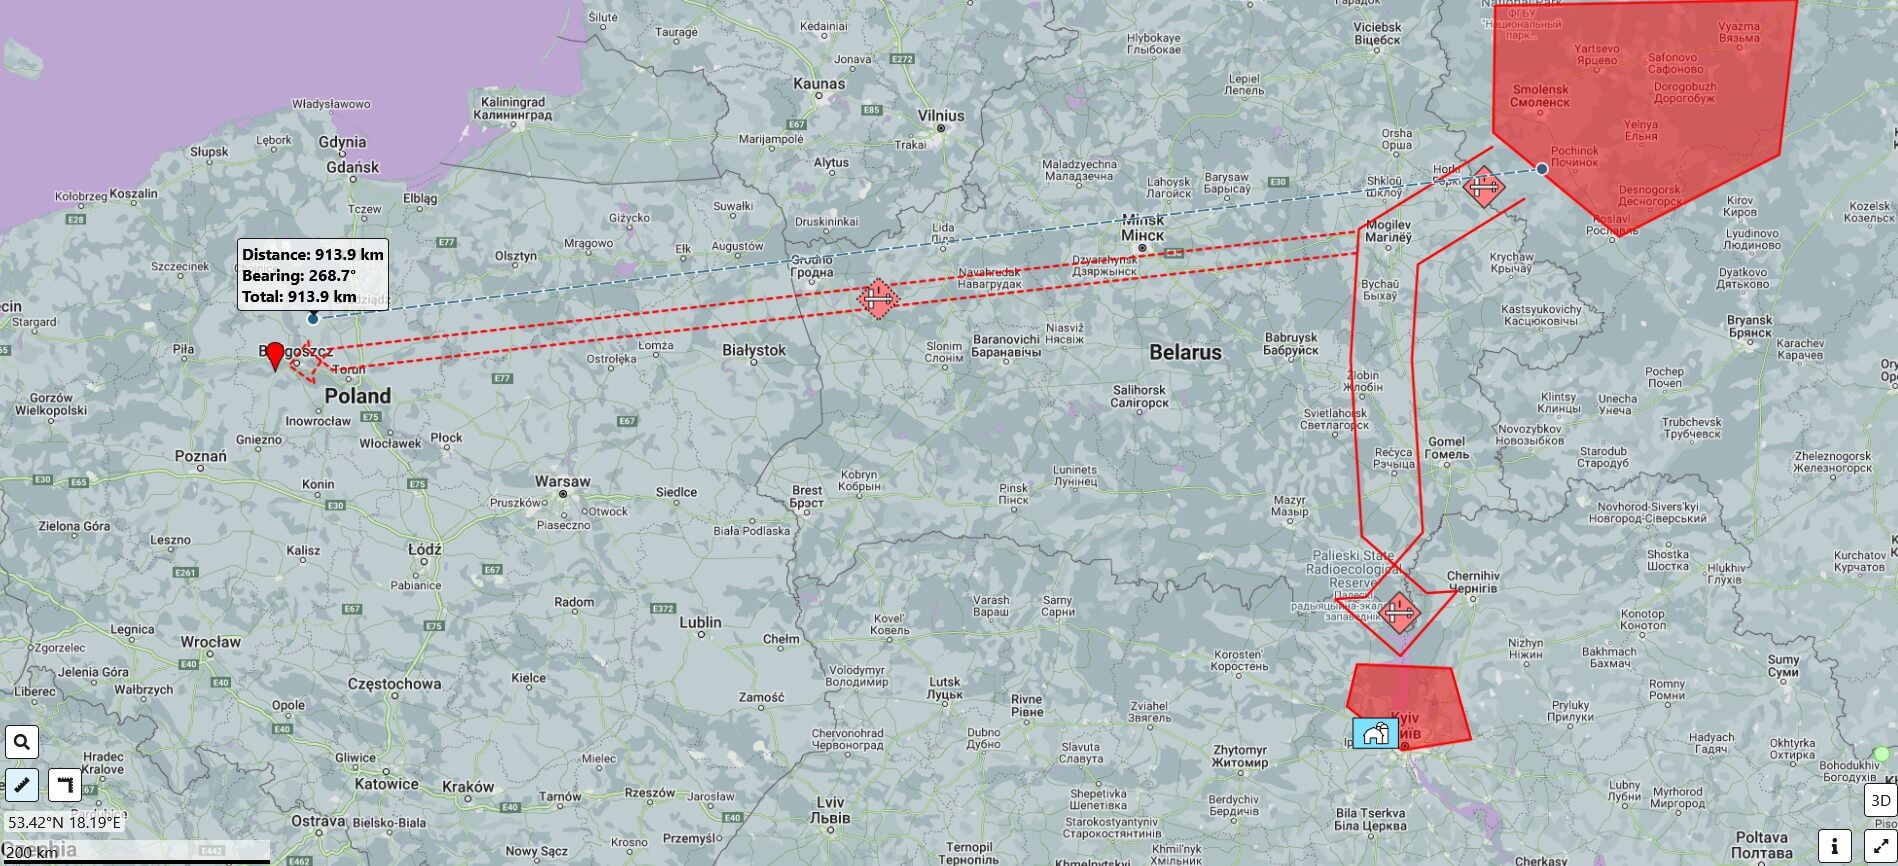 Onet: According to one of the versions, the Russian missile near Bydgoszcz flew from the direction of Belarus